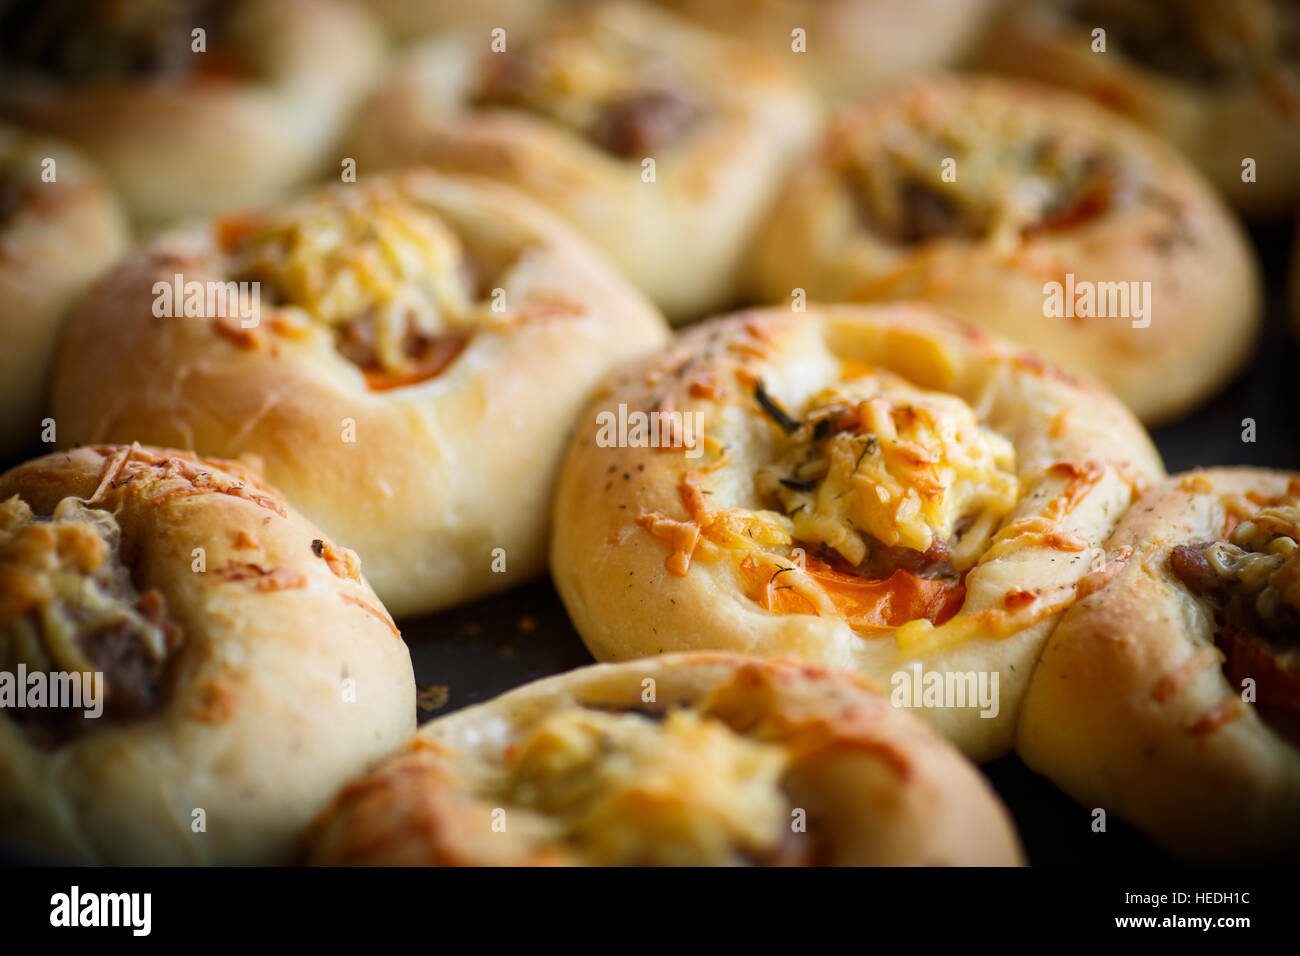 baked open pies with meat Stock Photo